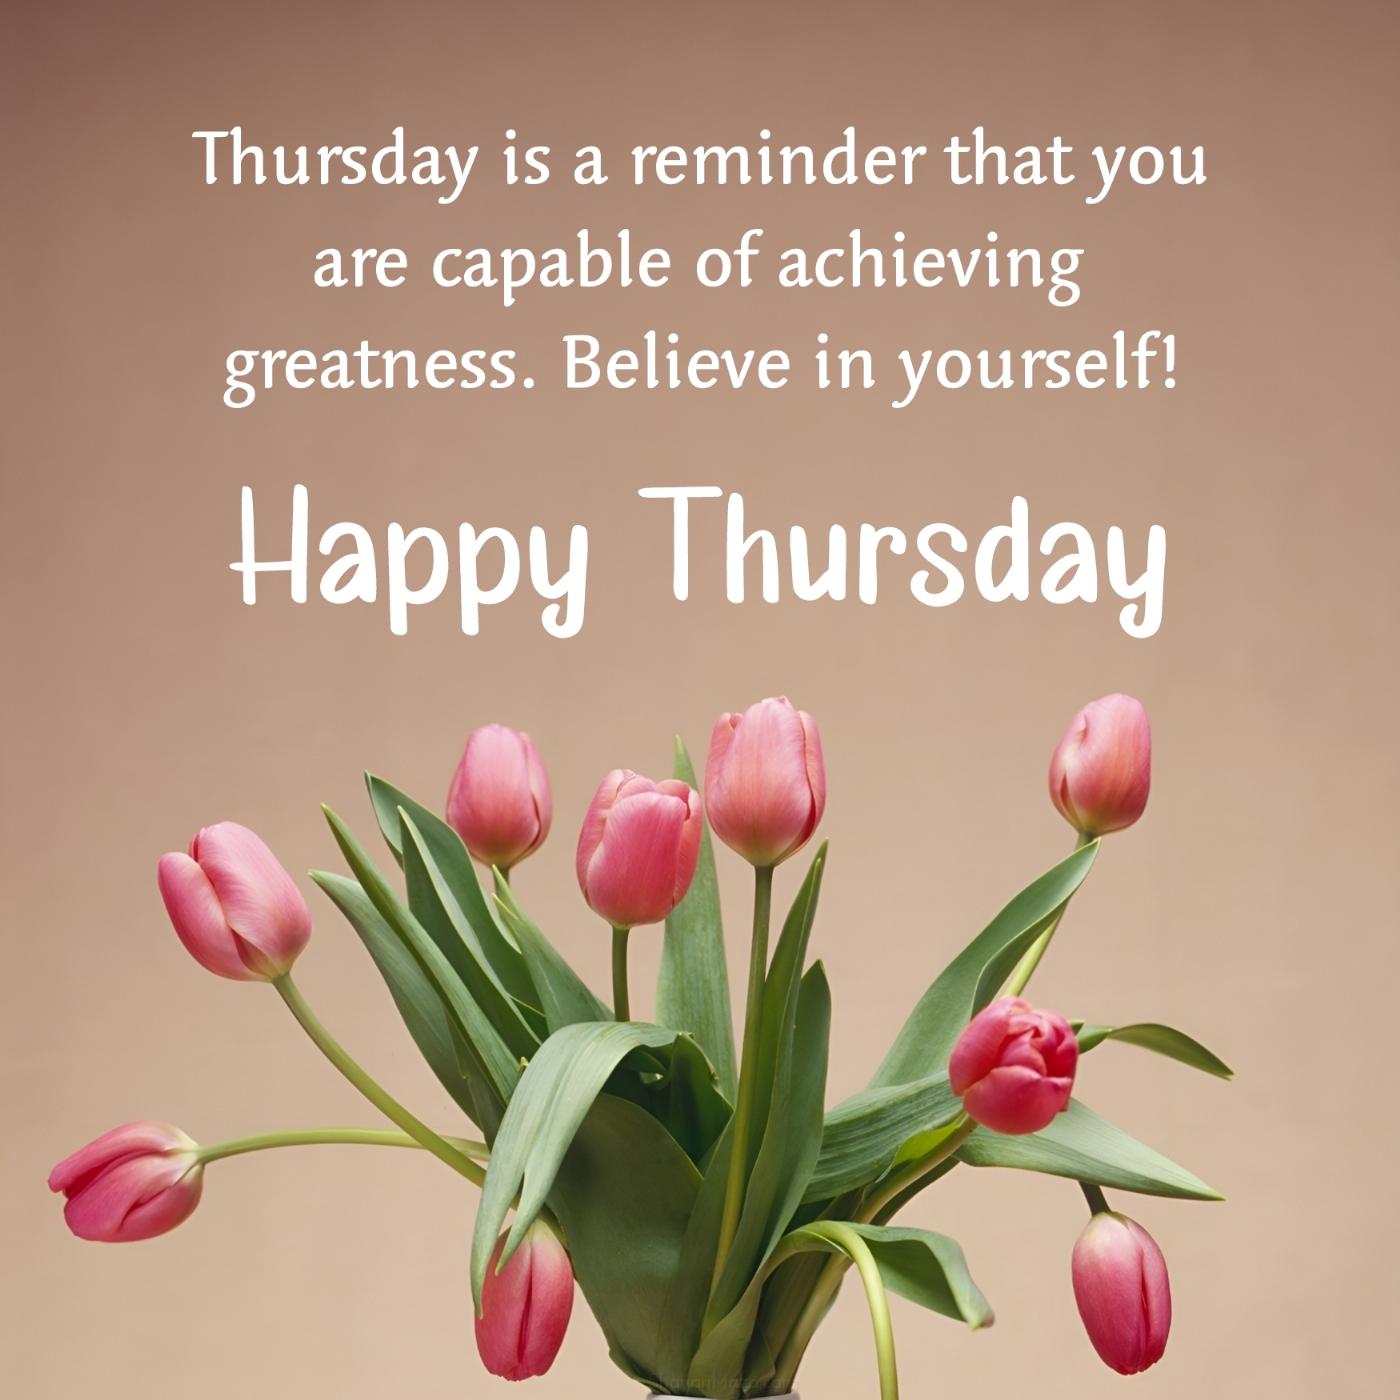 Thursday is a reminder that you are capable of achieving greatness